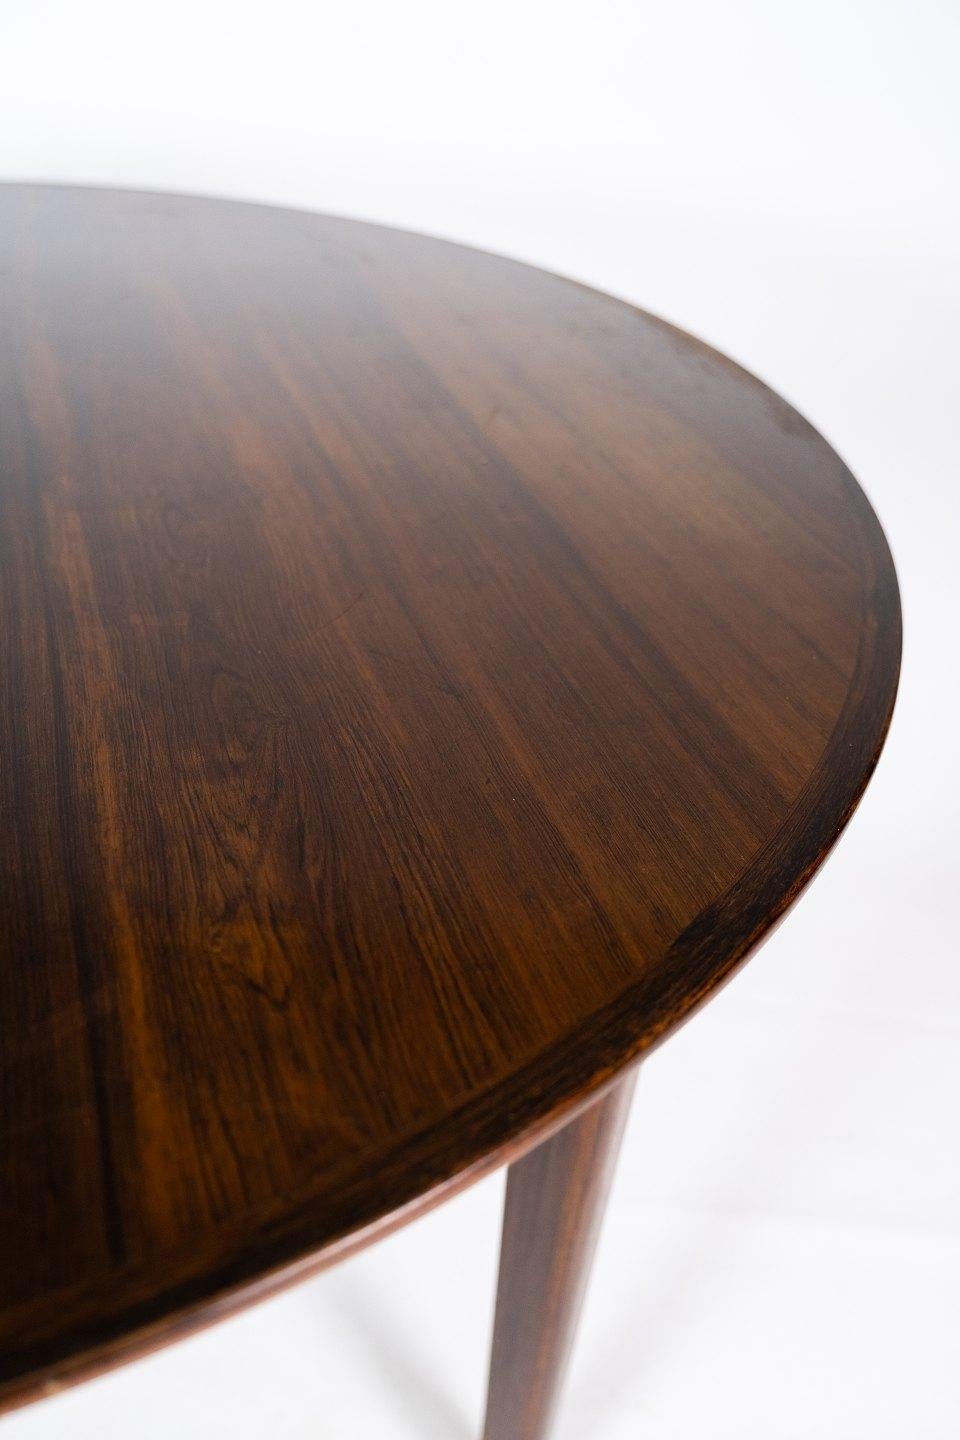 Scandinavian Modern Dining Table in Rosewood of Danish Design from the 1960s